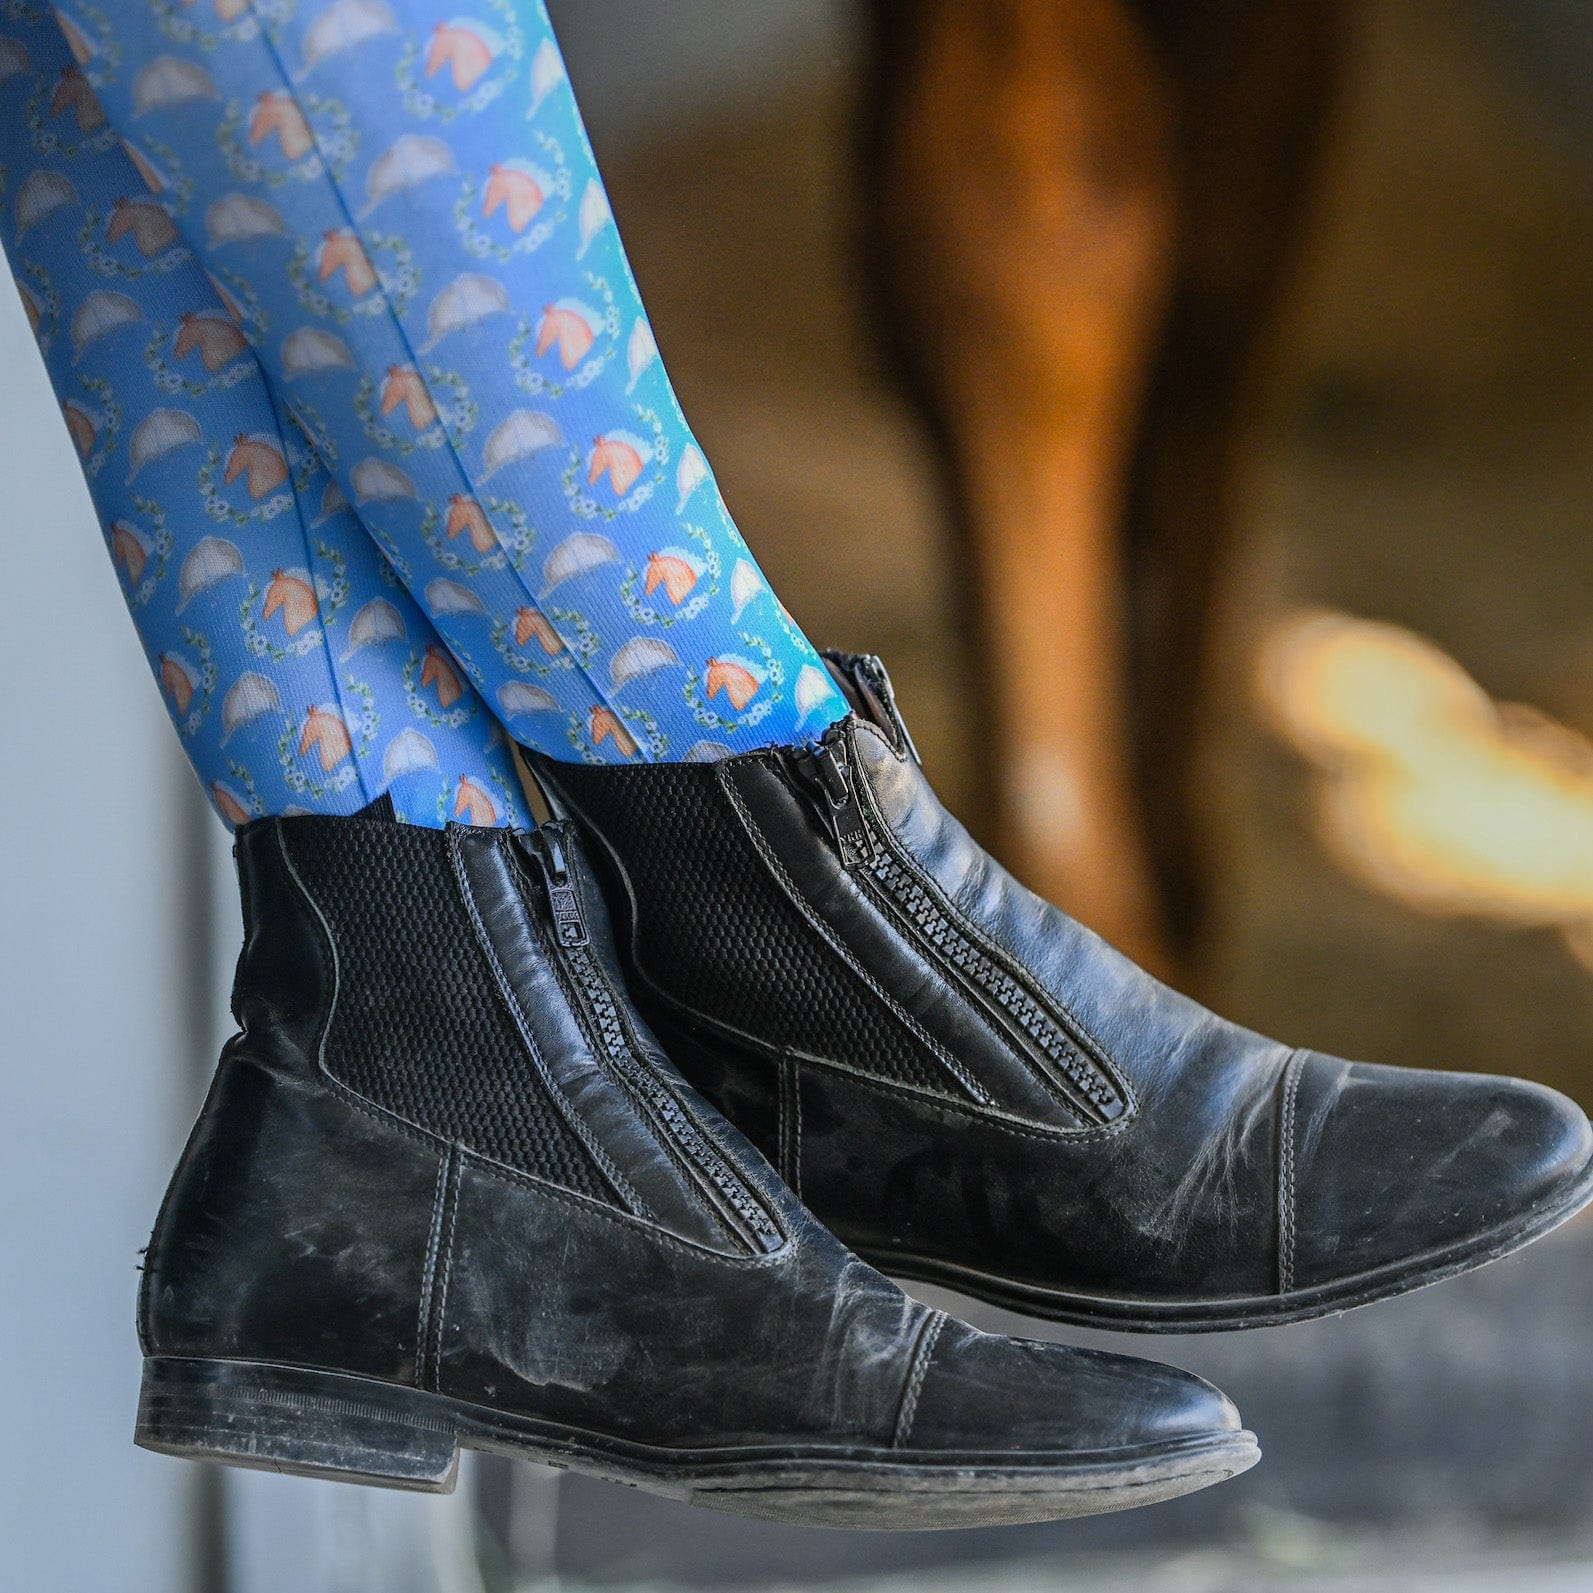 Dreamers &amp; Schemers Boot Socks in Derby Blue - One Size